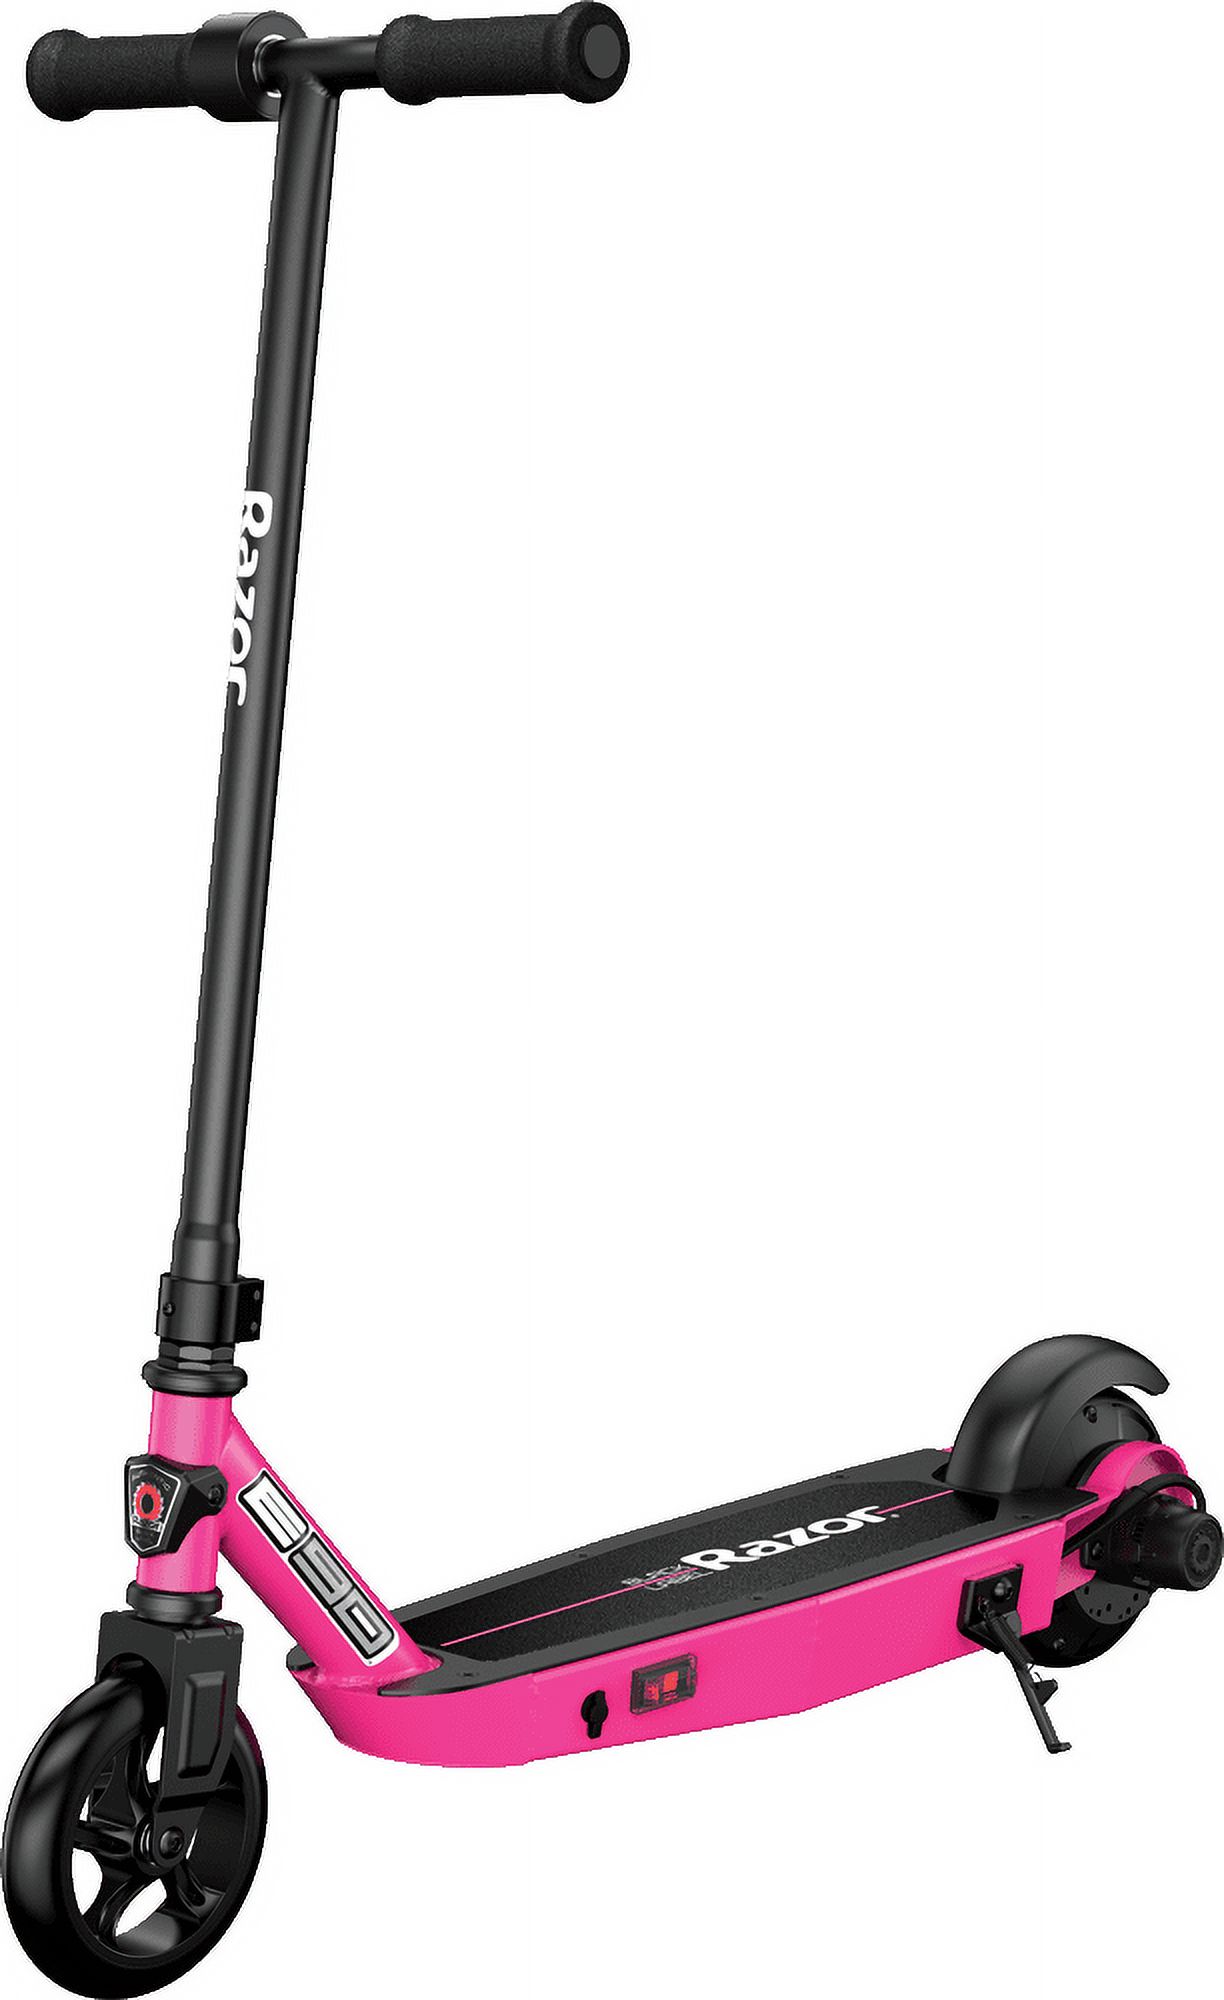 Razor Black Label E90 Electric Scooter - Pink, for Kids Ages 8+ and up to 120 lbs, up to 10 mph - image 1 of 13